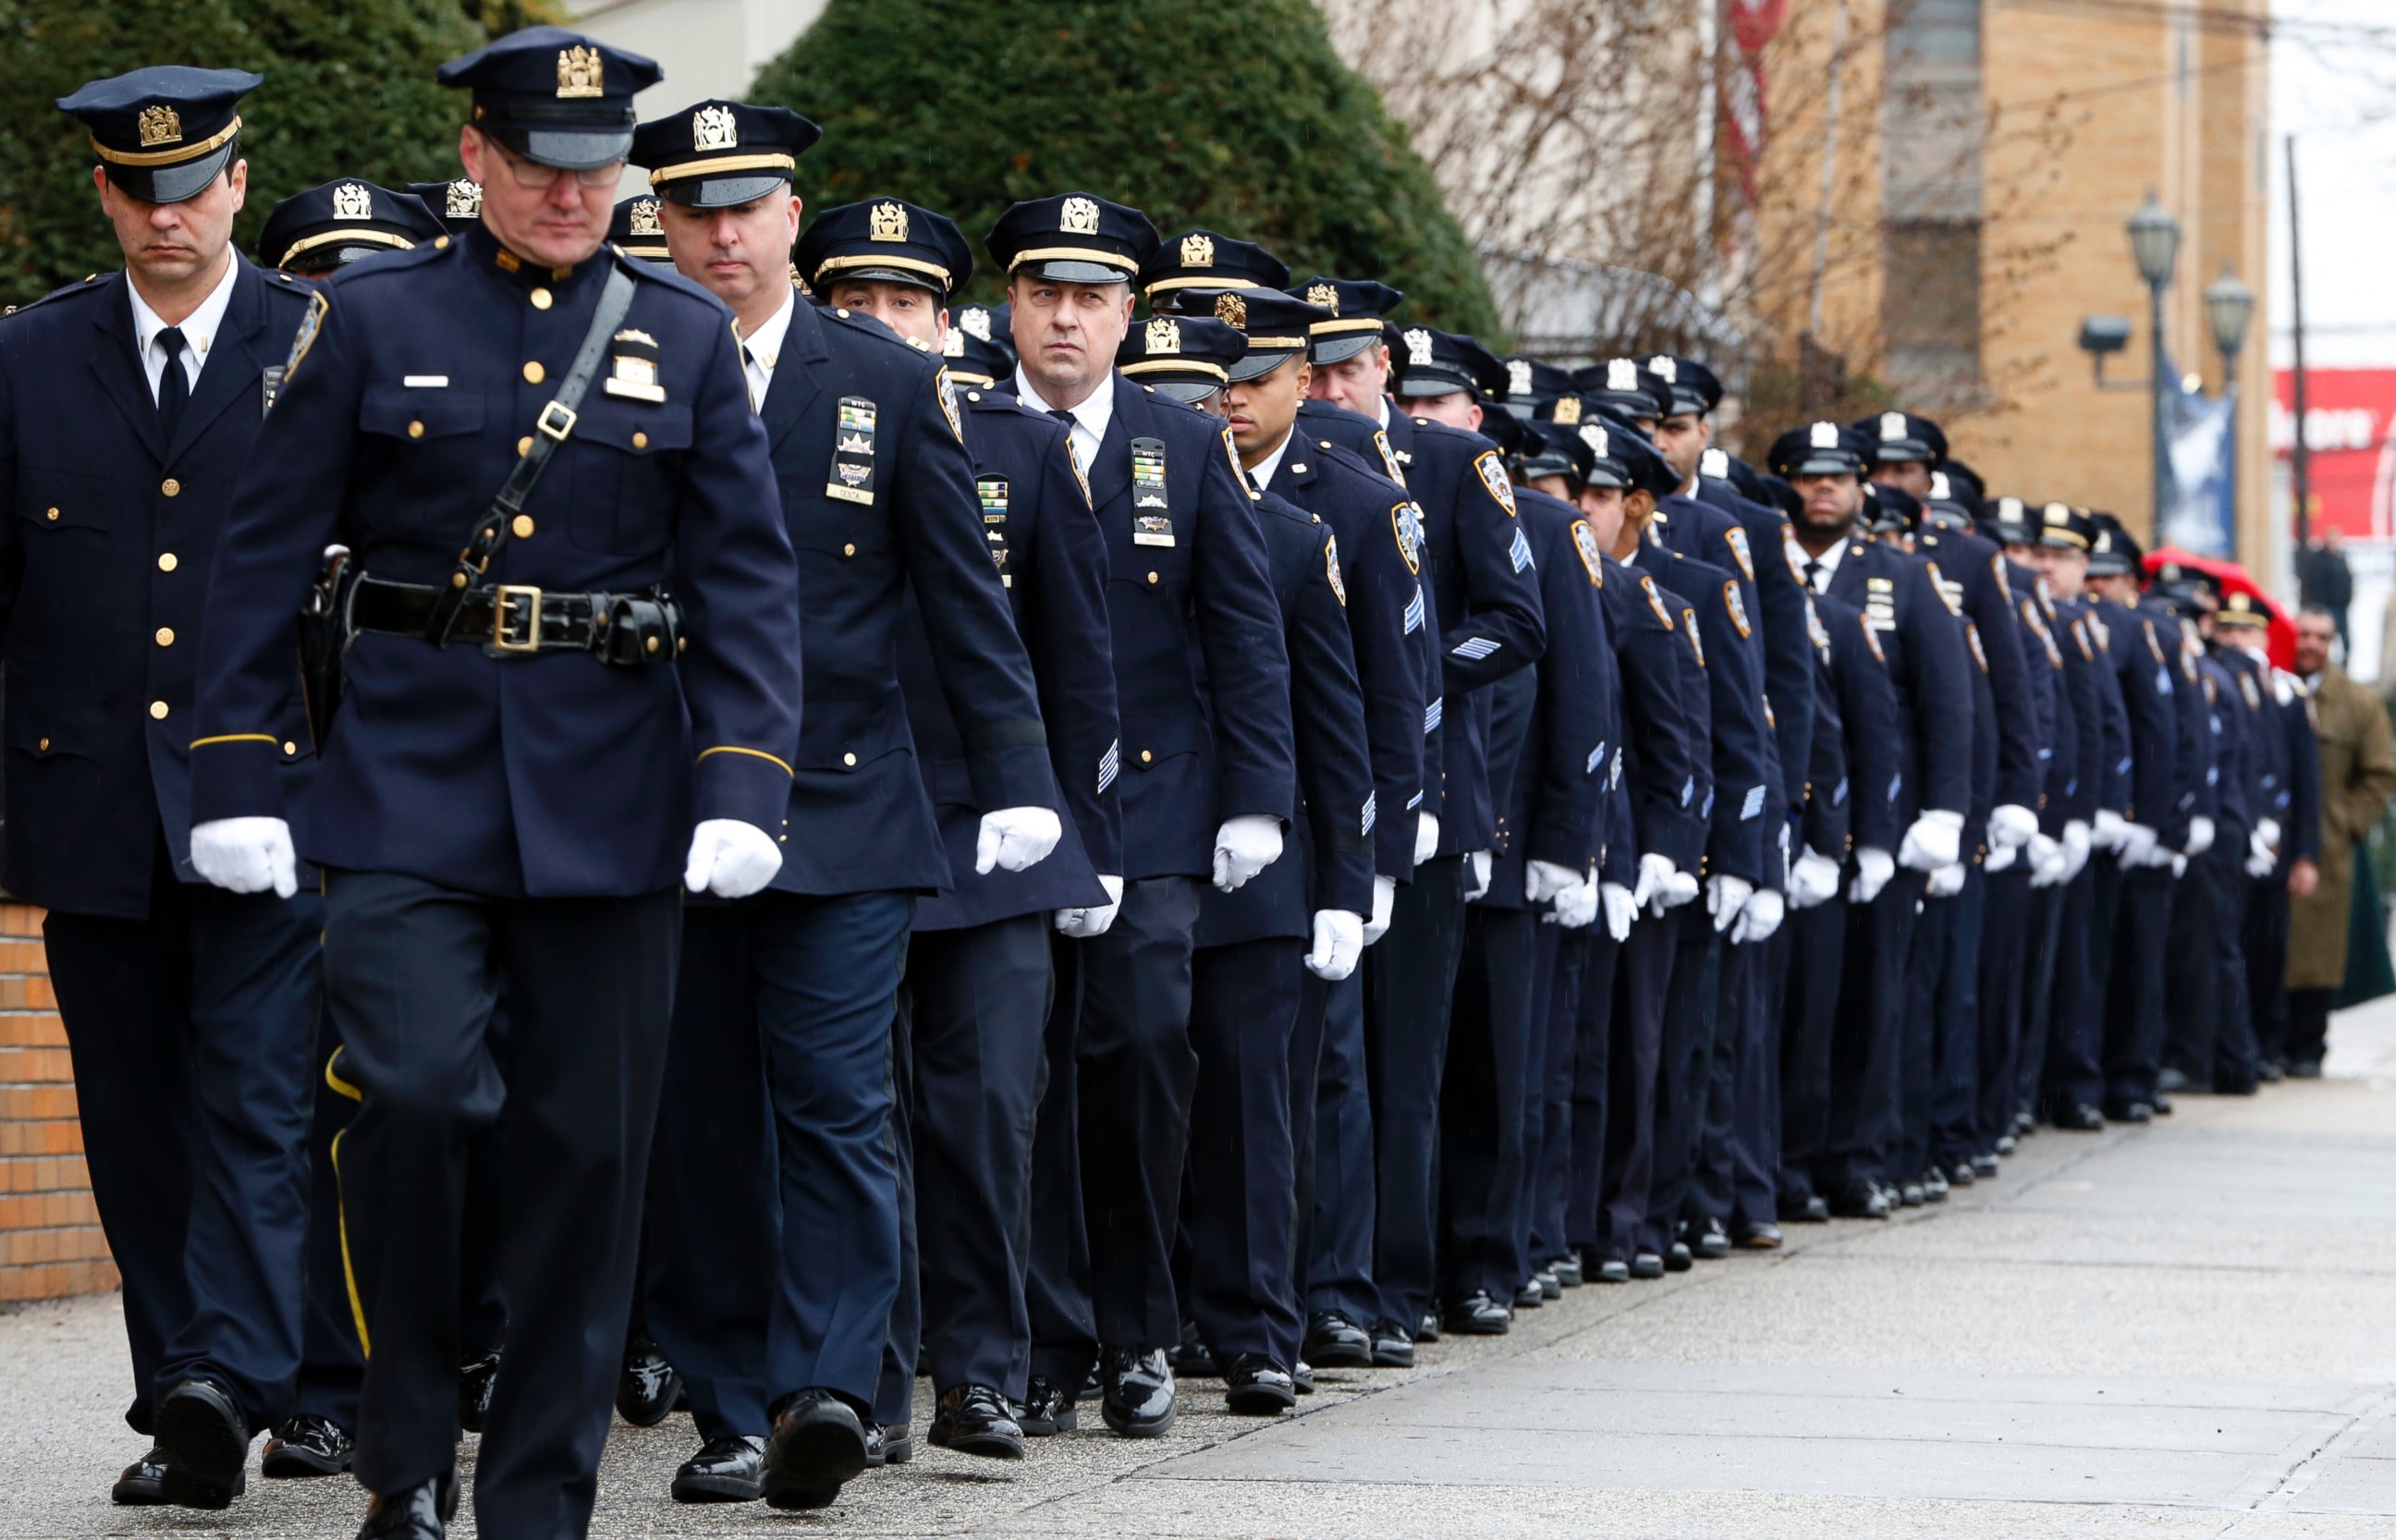 PHOTO: New York City police officers march before funeral services for police officer Wenjian Liu at Aievoli Funeral Home, Jan. 4, 2015, in the Brooklyn borough of New York.